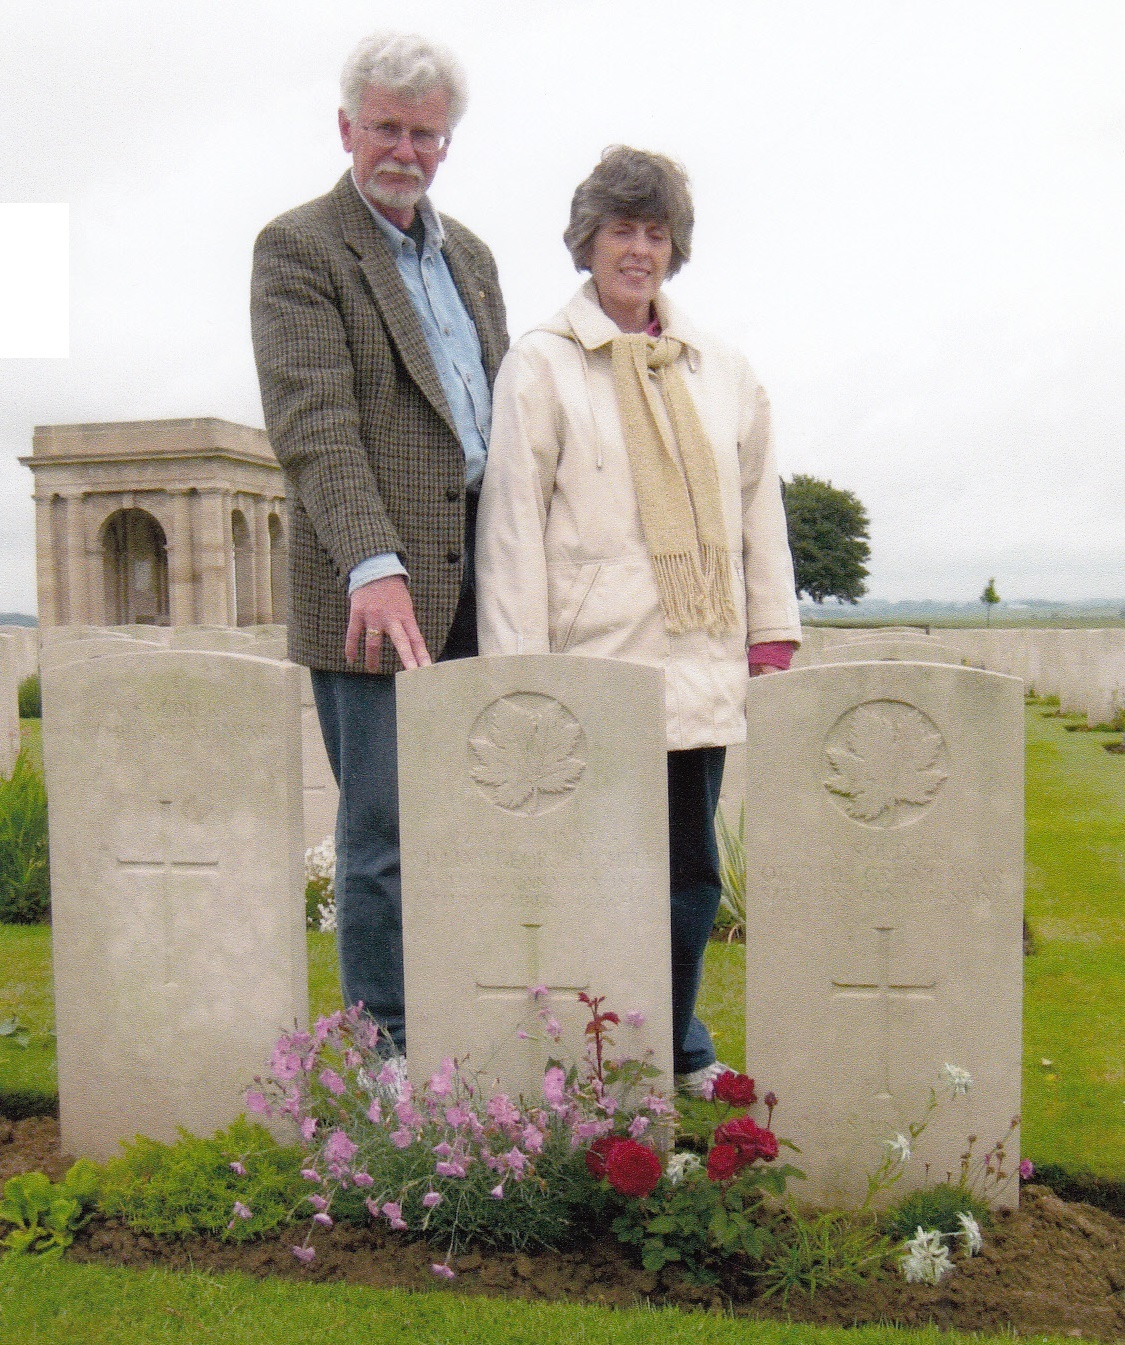 Peter and Barbara at the grave of  William George Lightle, France